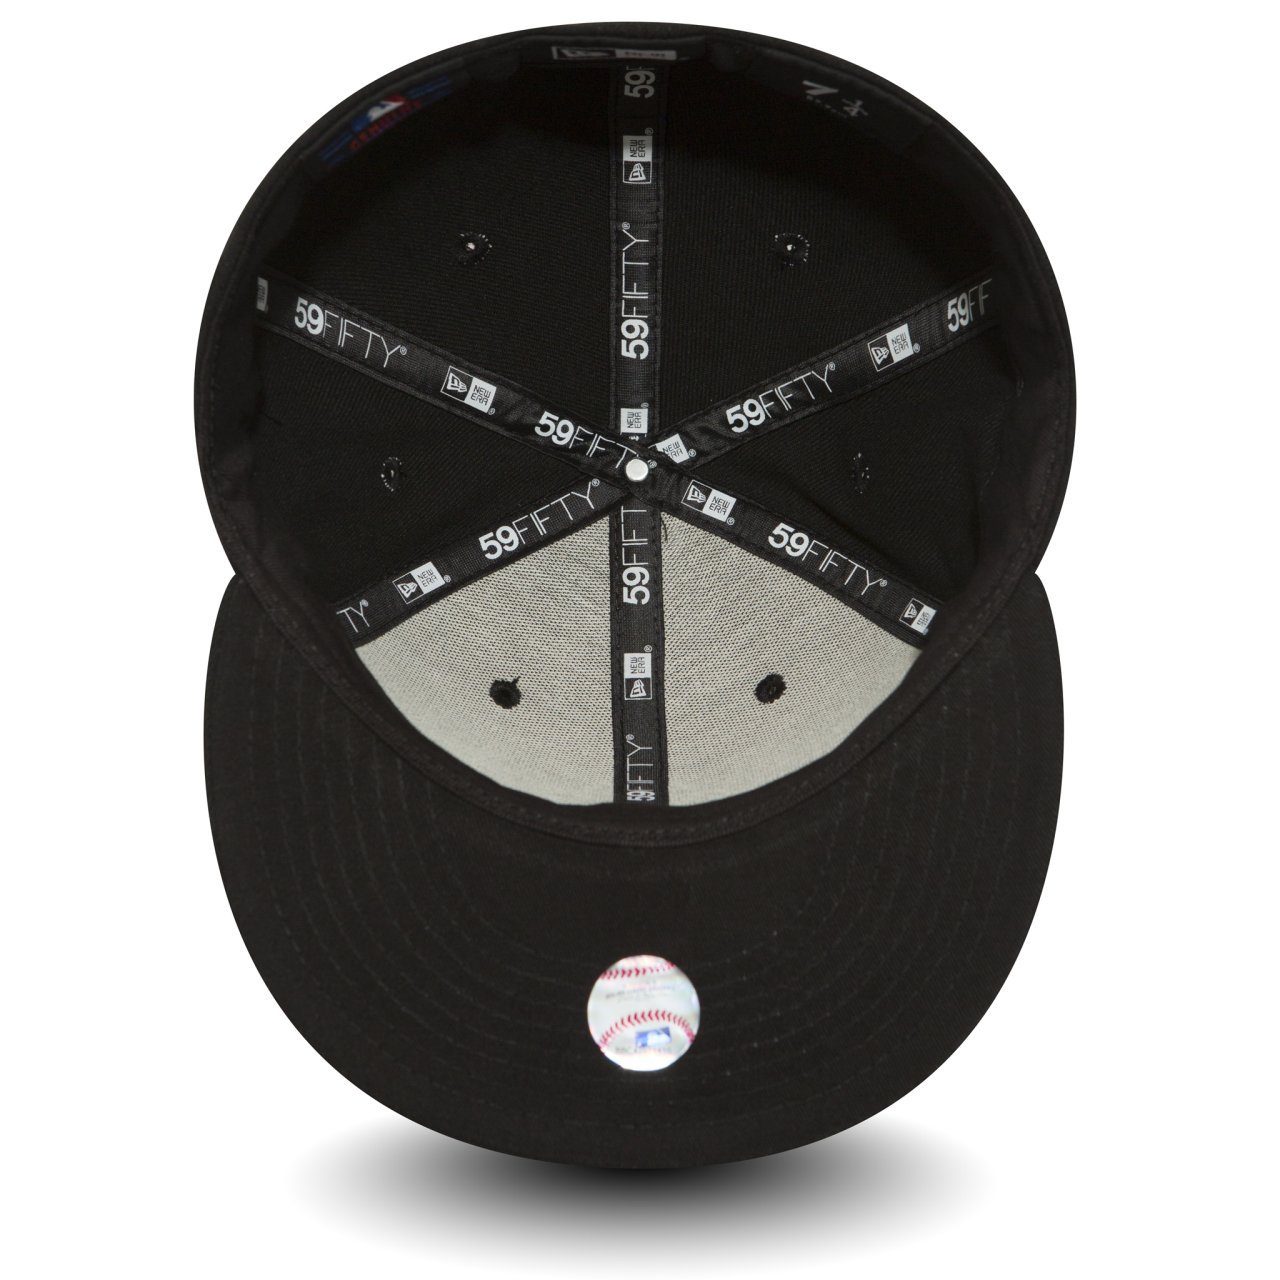 MLB New Fitted Cap 59Fifty Pittsburgh Era Pirates